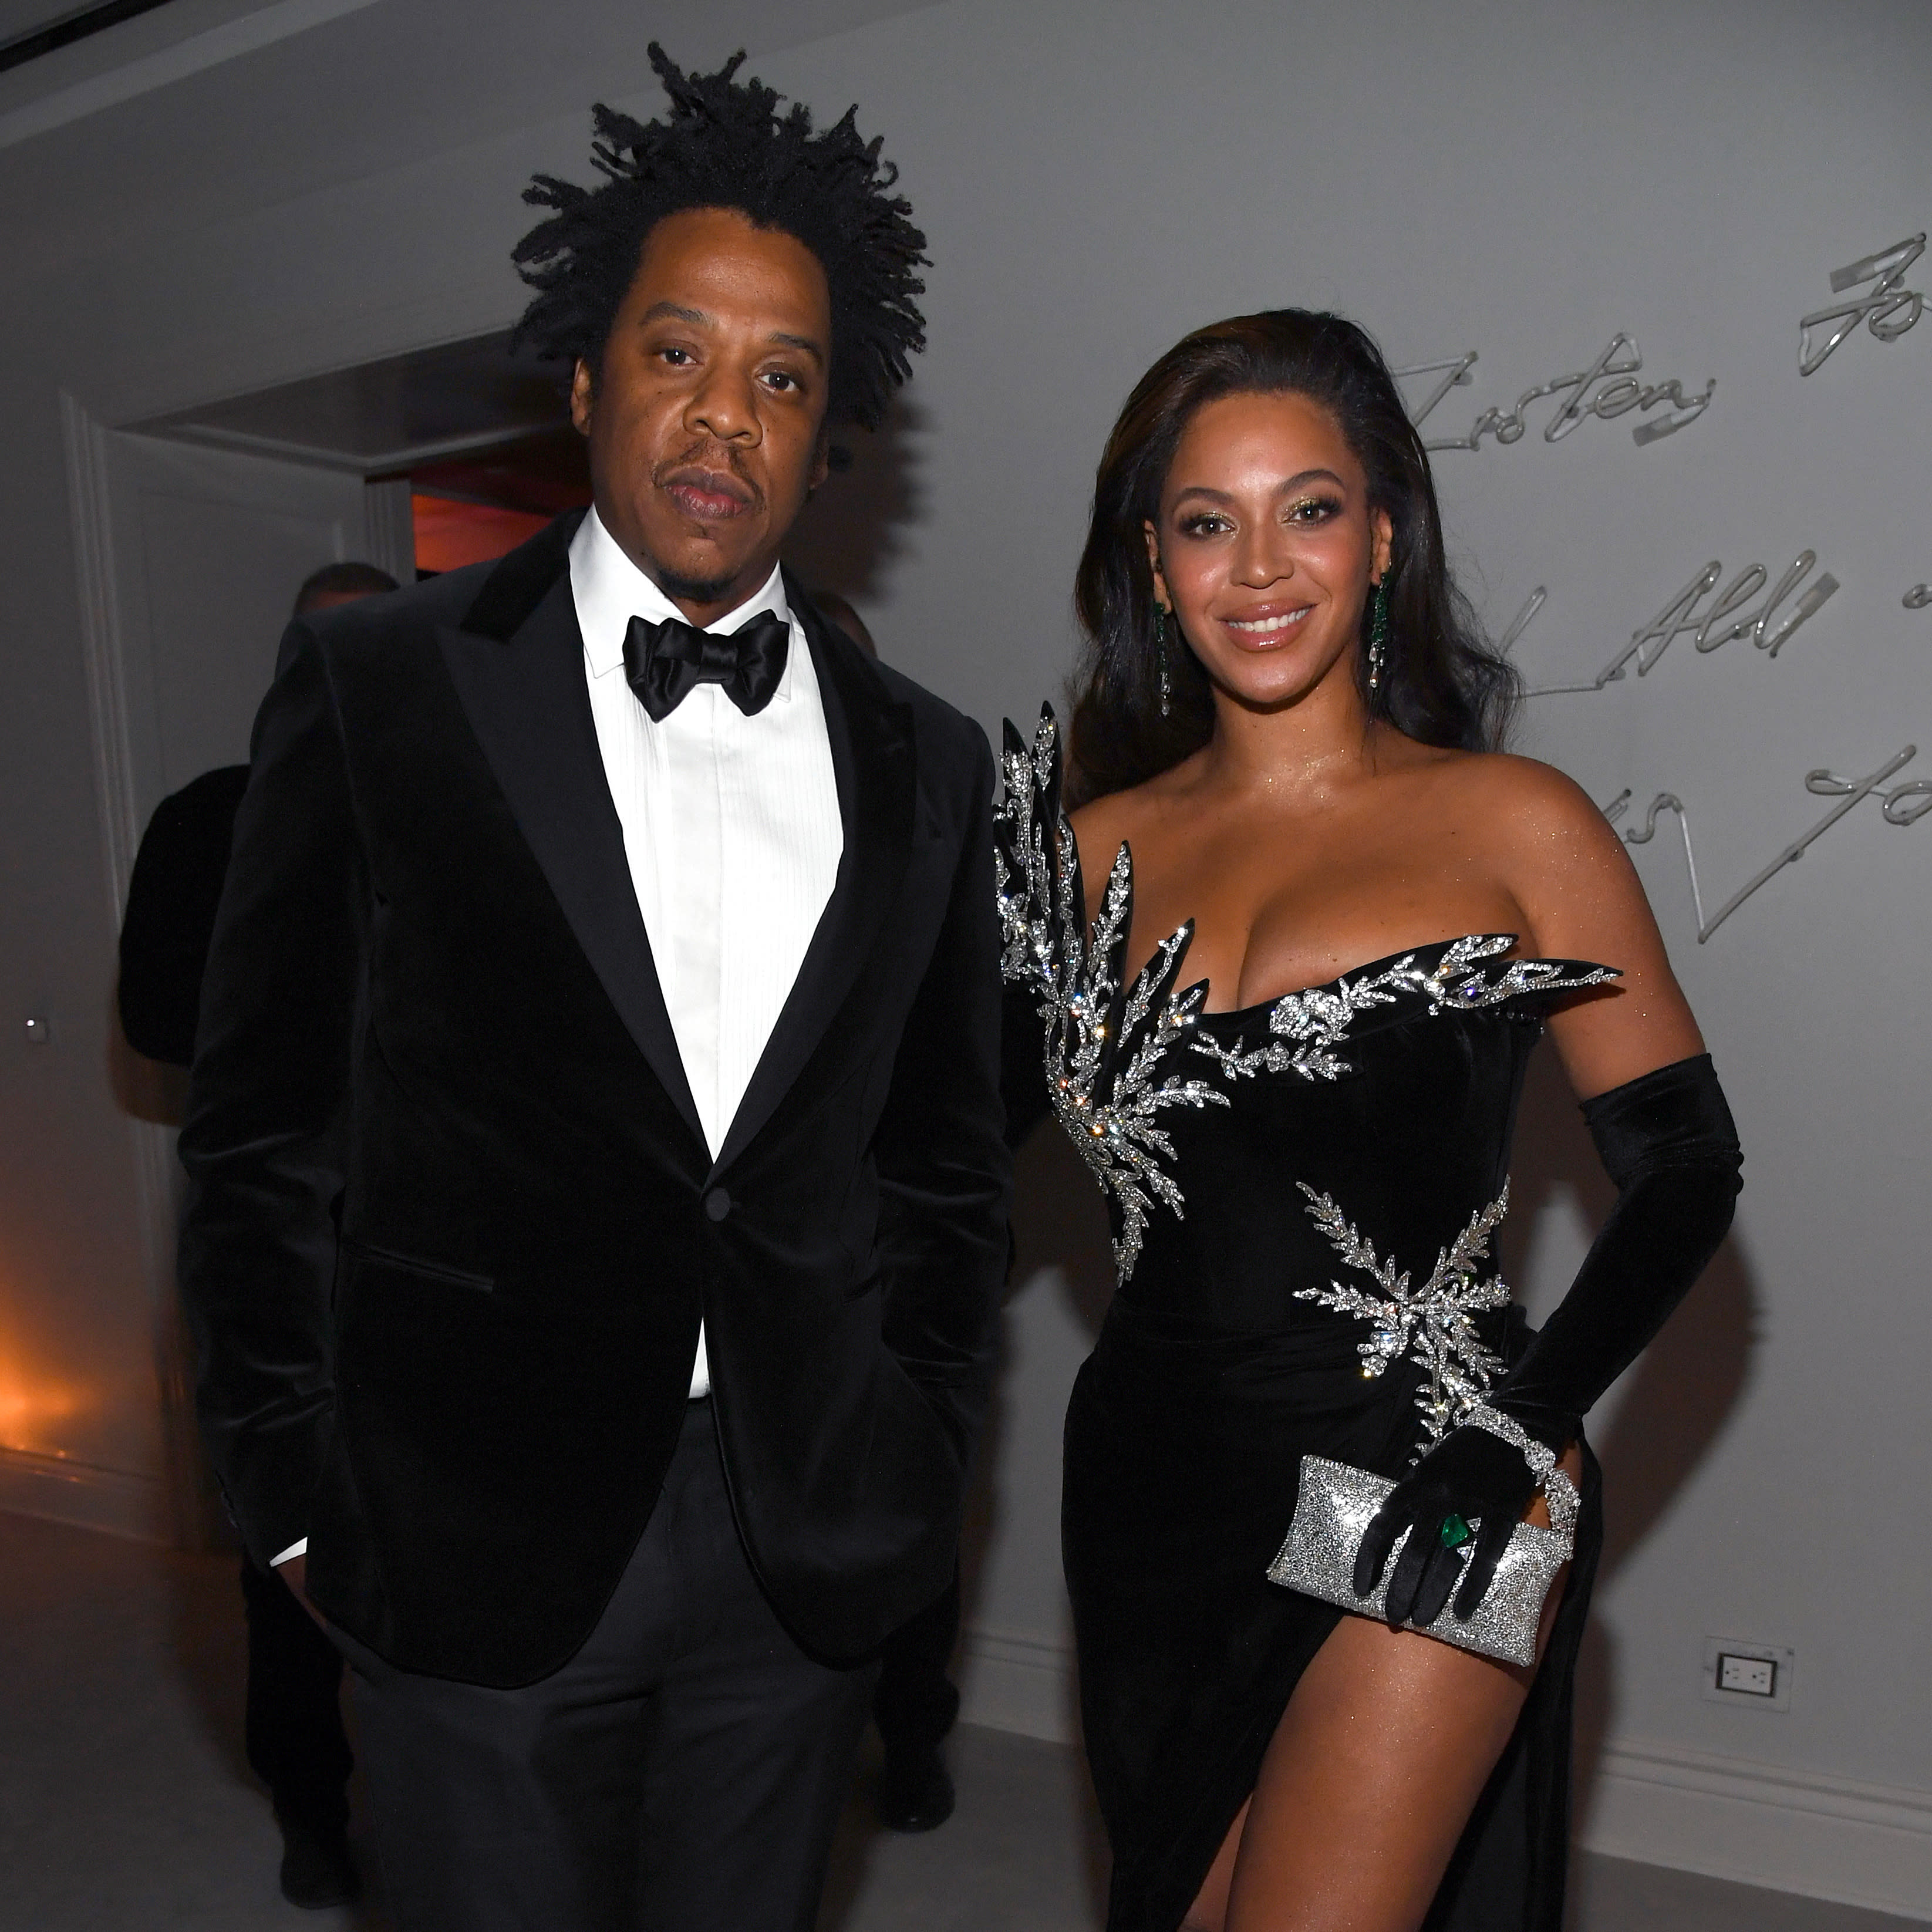 Collection 101+ Images pictures of beyonce and jayz Updated